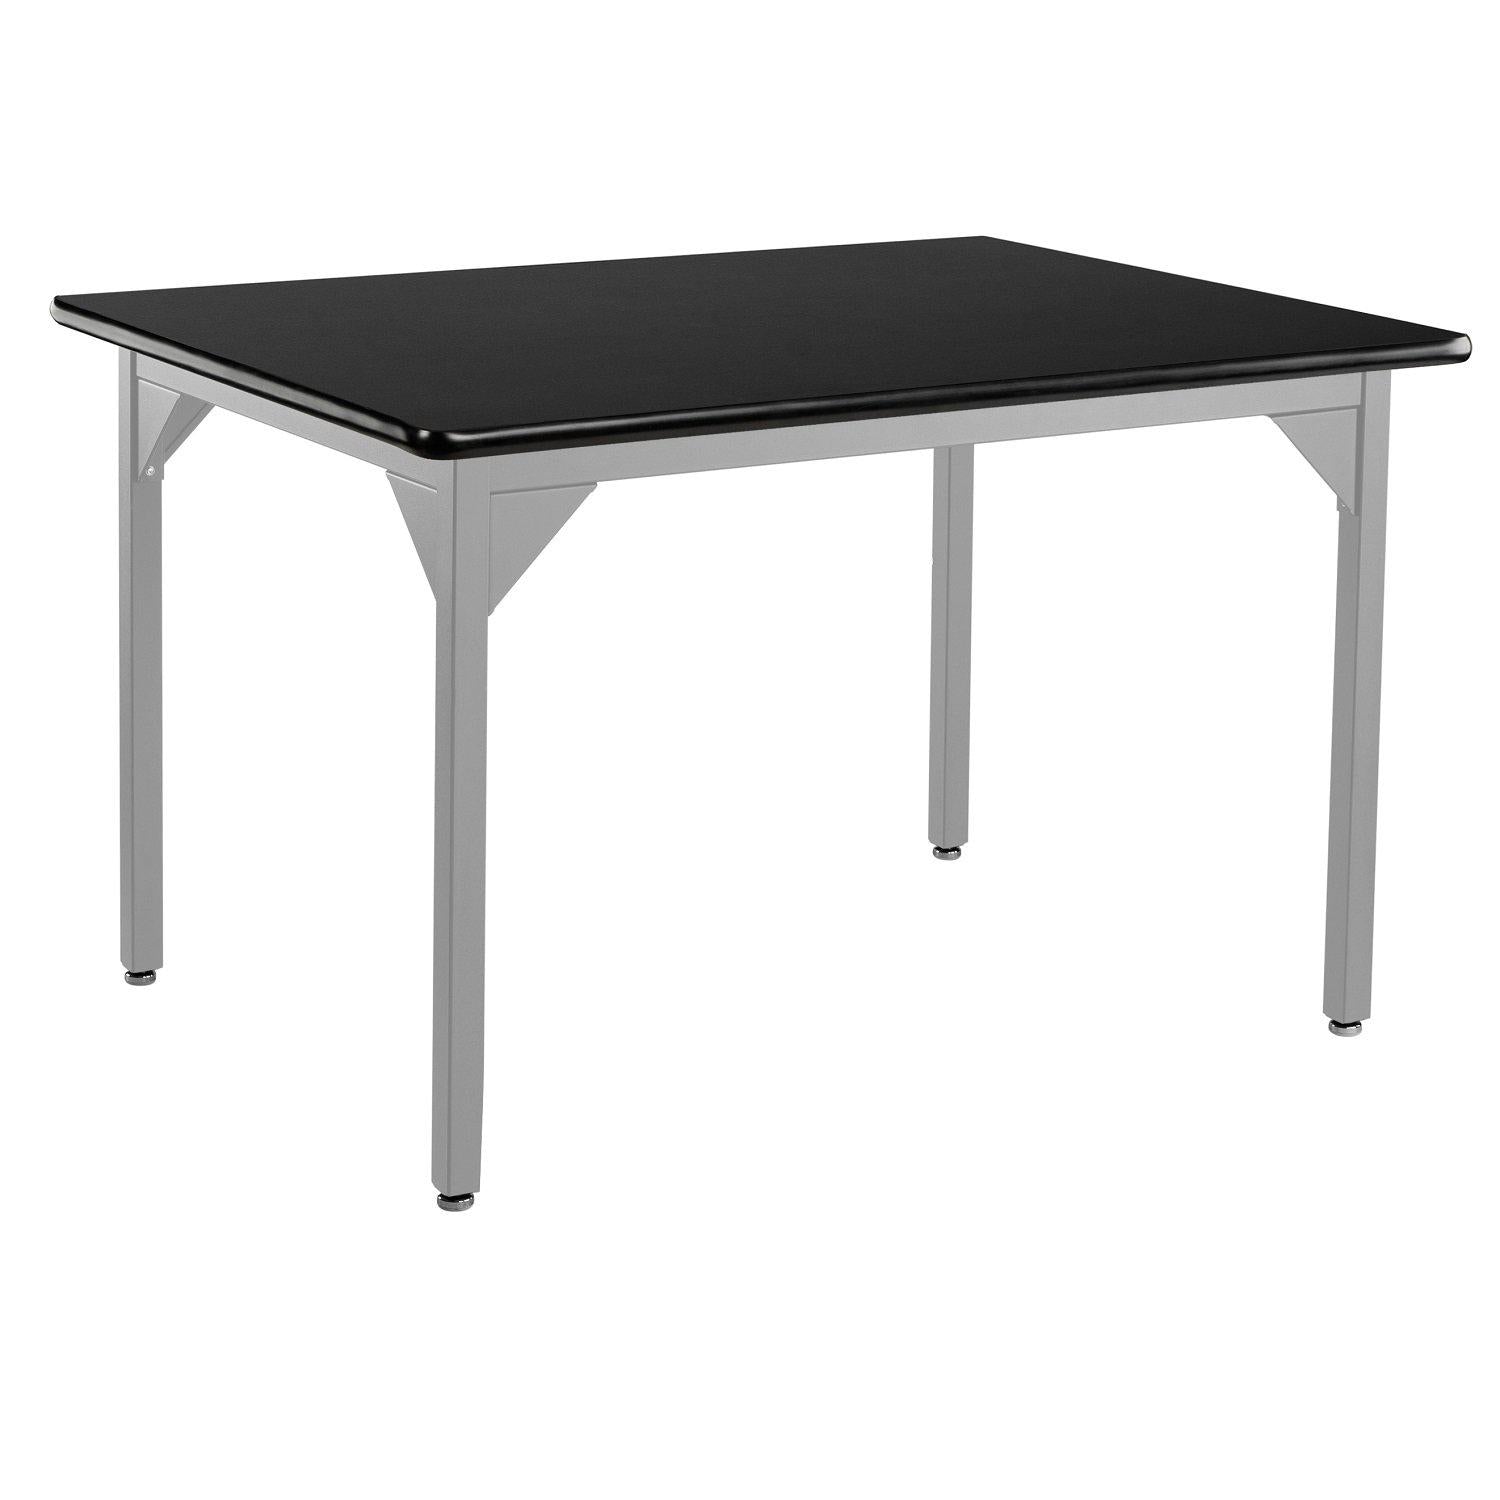 Heavy-Duty Fixed Height Utility Table, Soft Grey Frame, 36" x 48", High-Pressure Laminate Top with T-Mold Edge